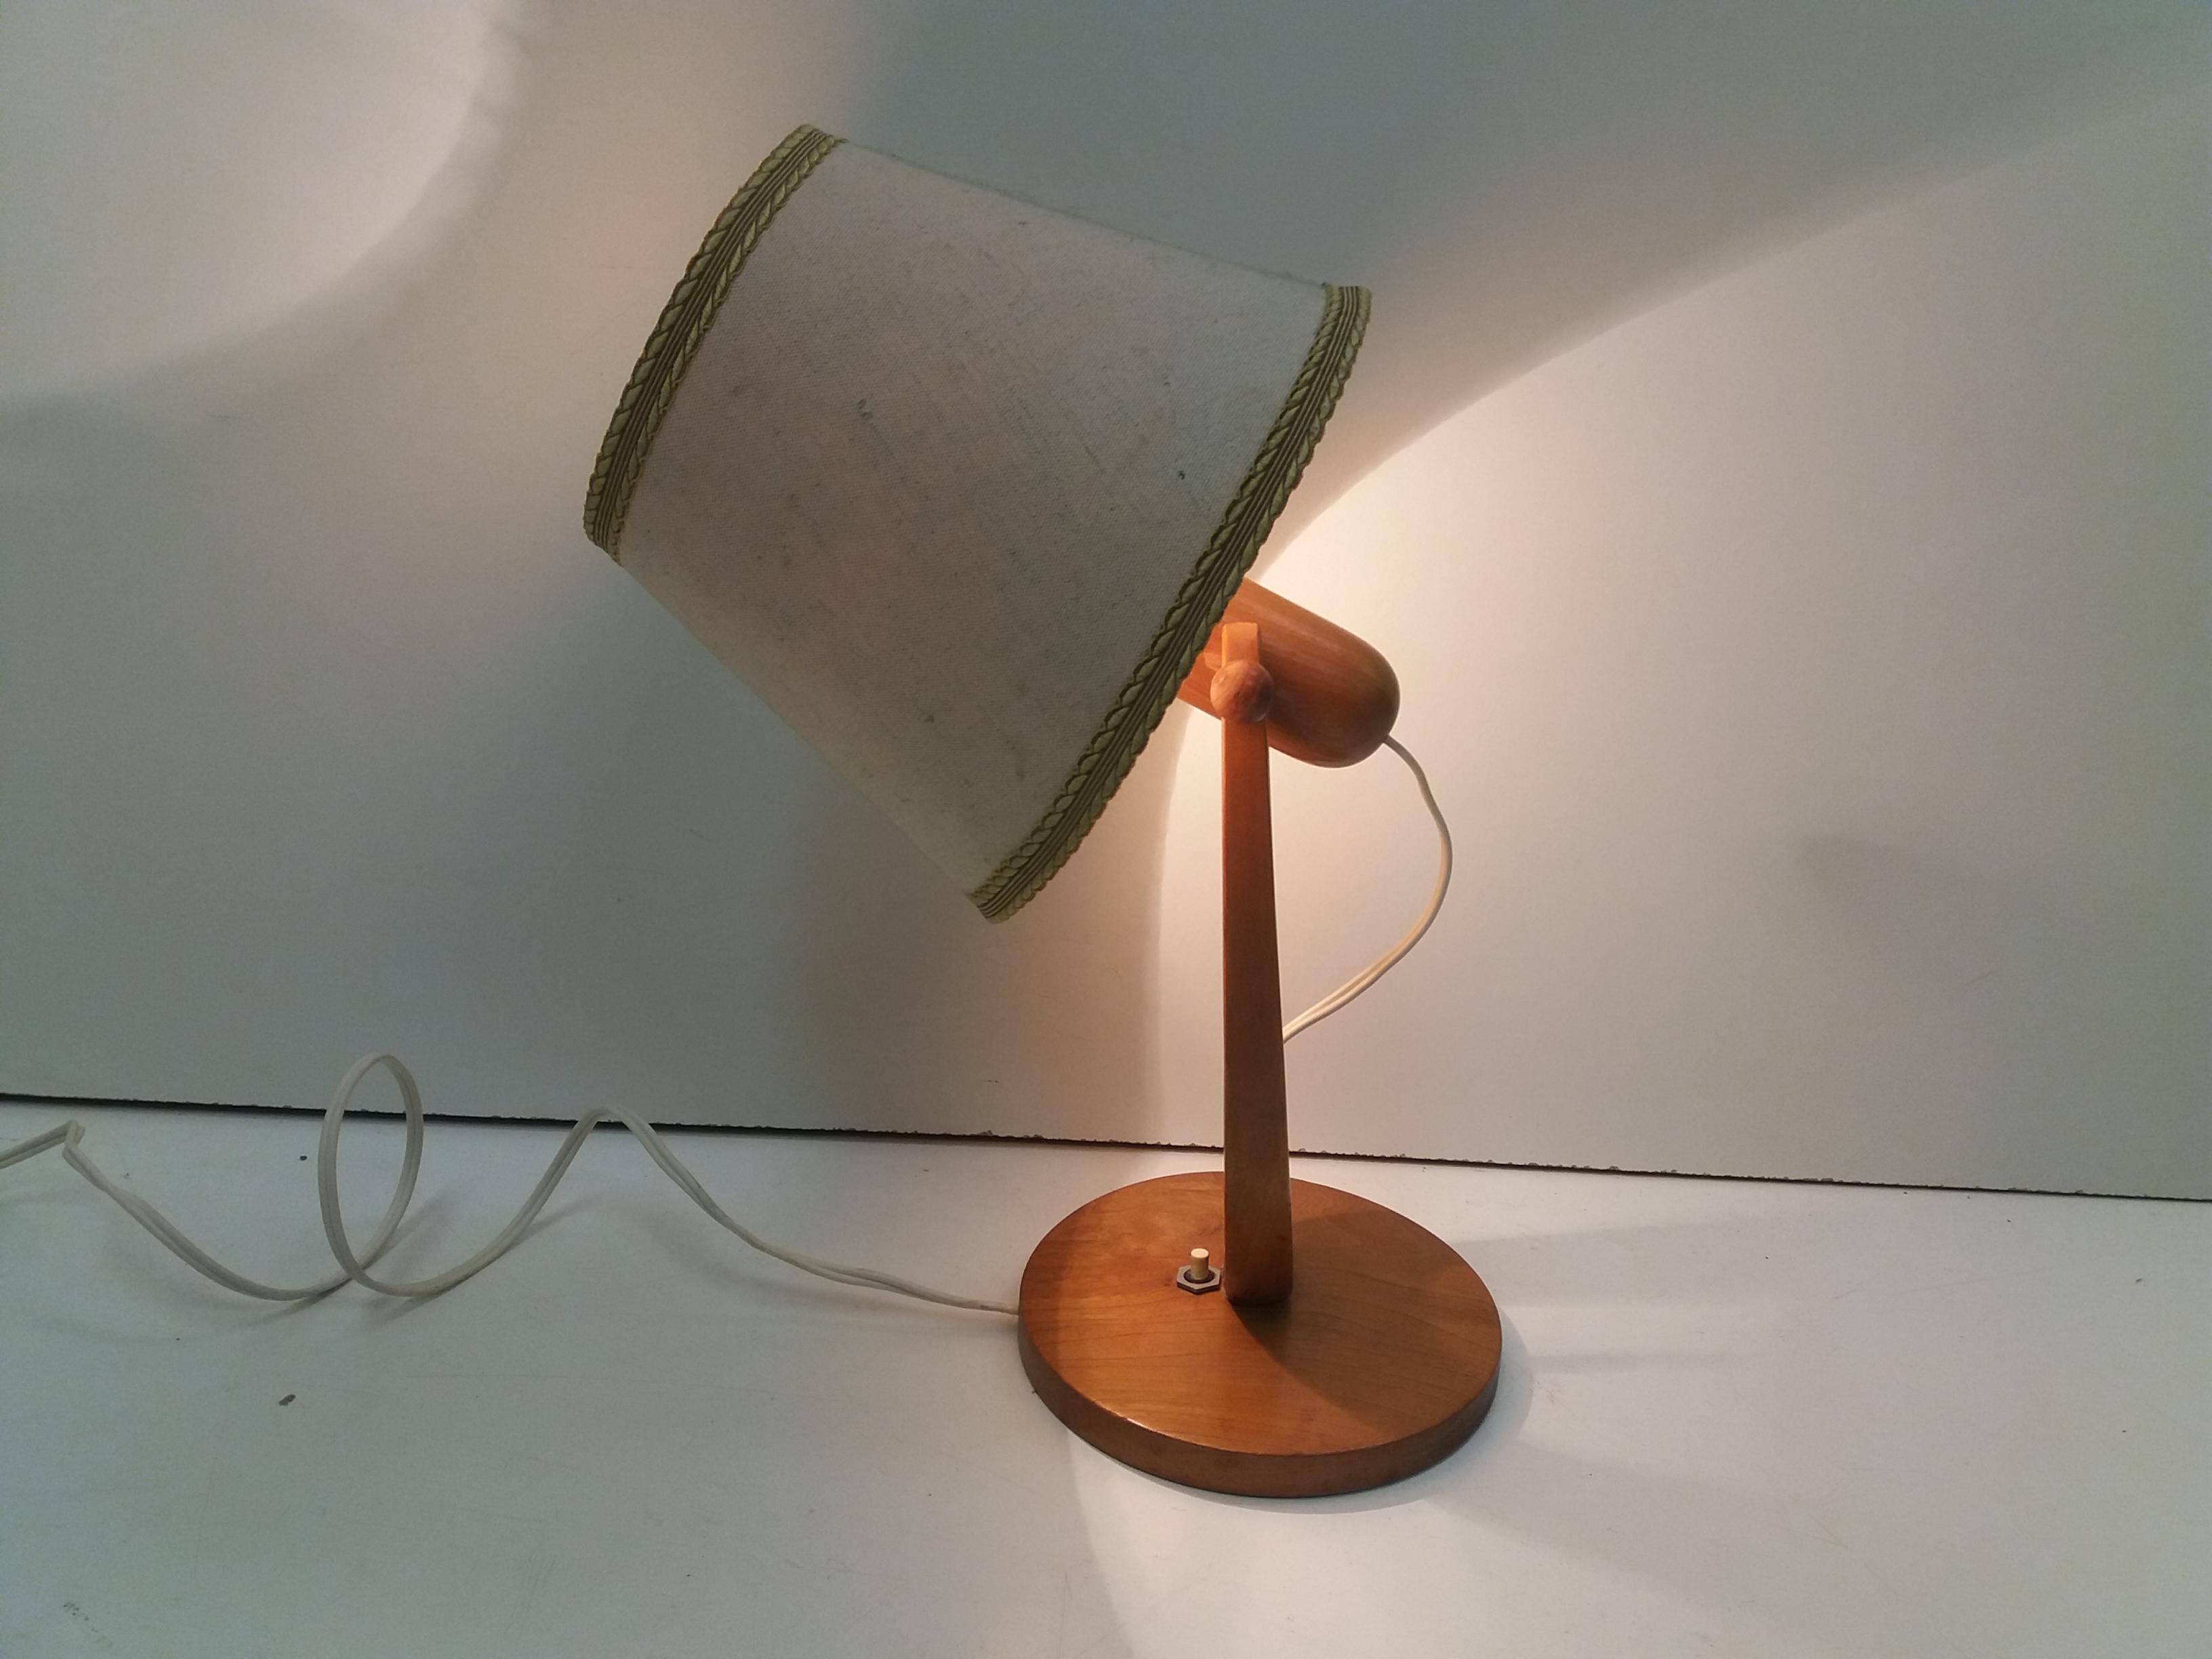 - made in Czechoslovakia
- made of wood, fabric lampshade
- design: Oldrich Starý
- fully functional
- good, original condition.